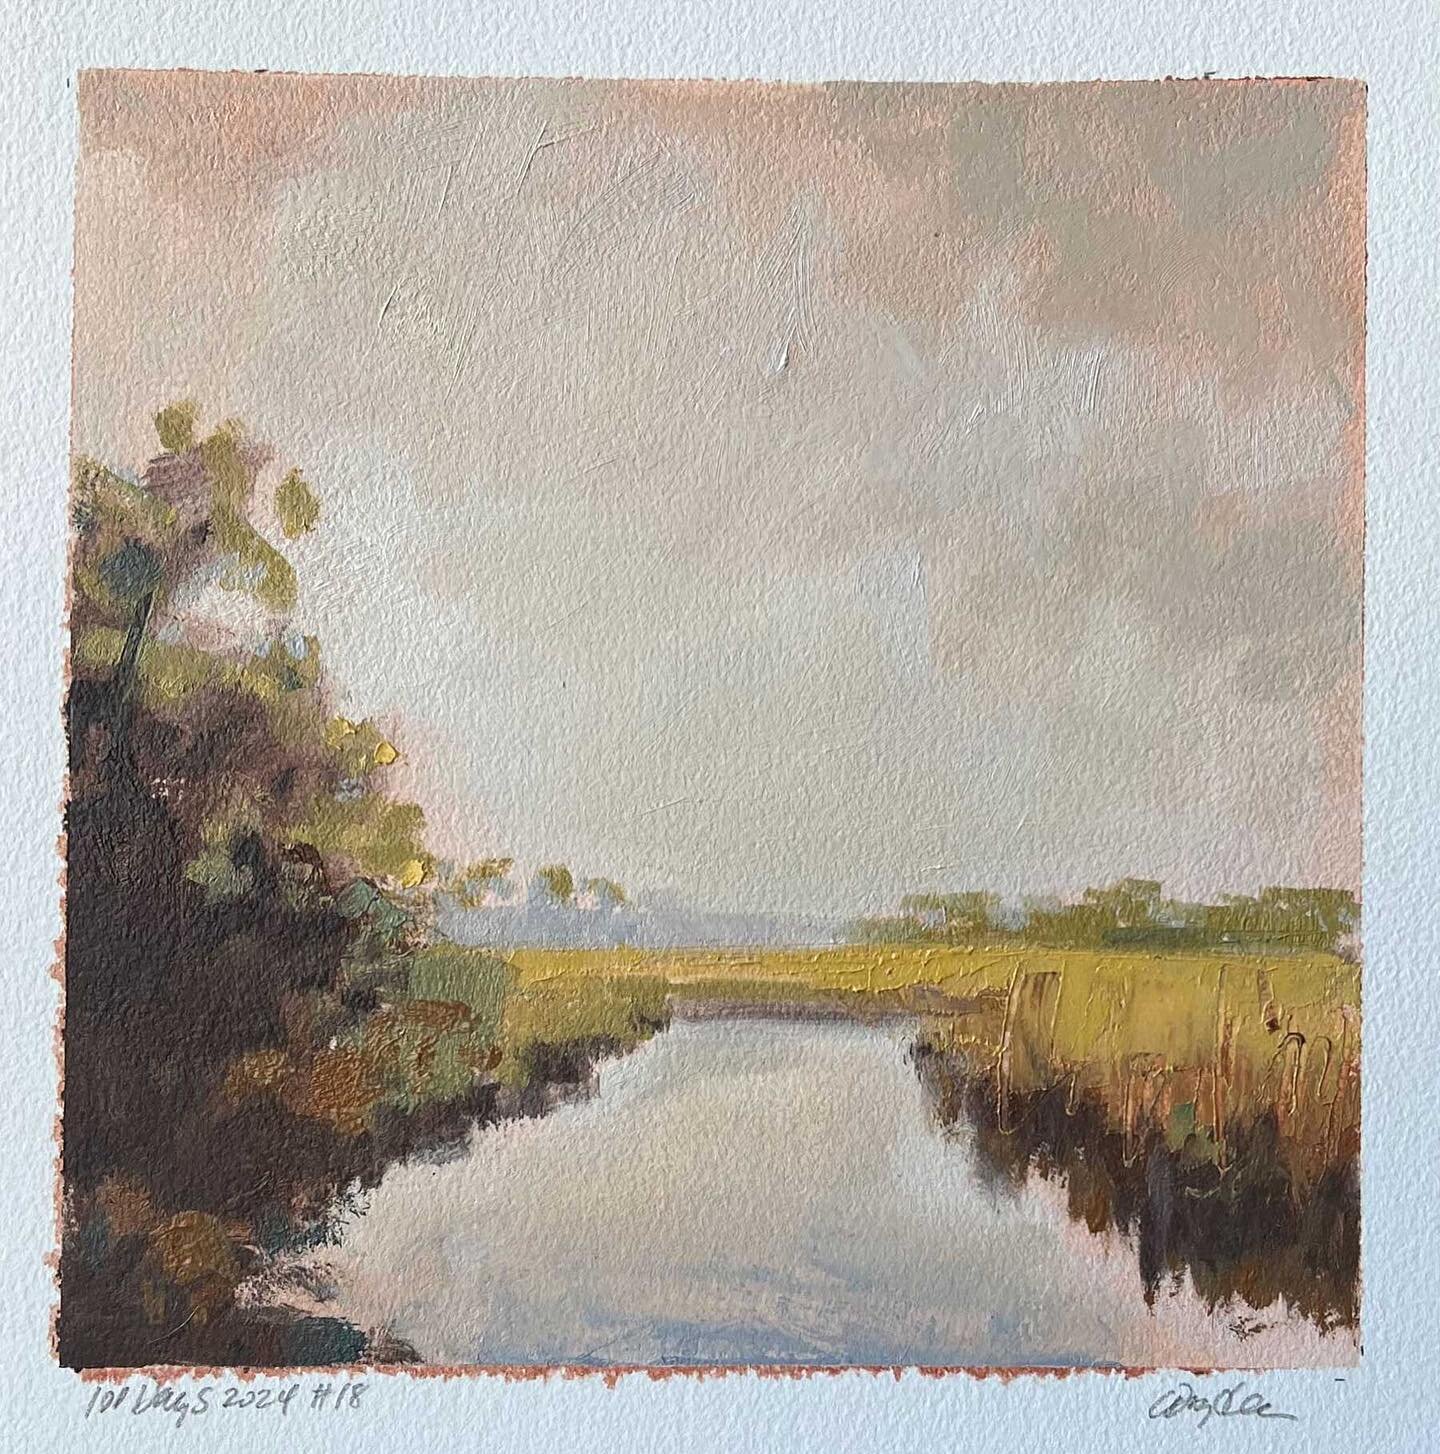 18/100 #100daysoflandscapestudies
8x8, oil on paper
#the100dayproject